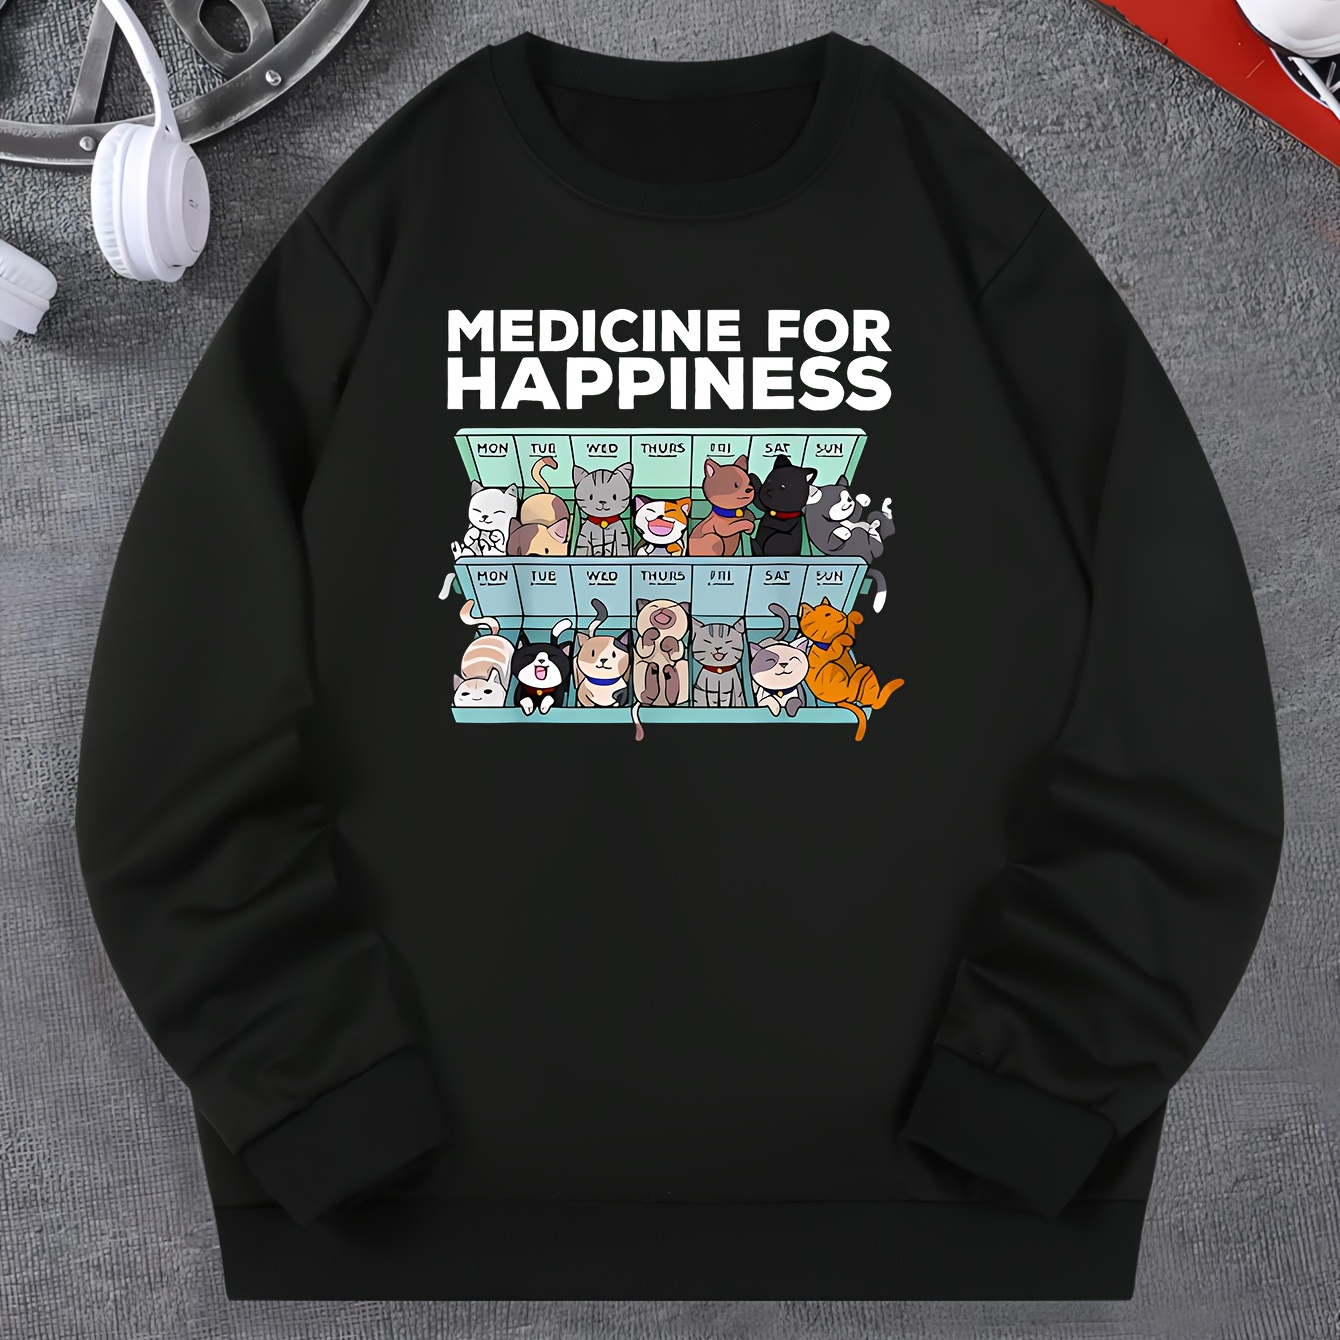 

Medicine For Happiness And Box Of Cats Print, Men's Trendy Sweatshirt, Casual Graphic Design Pullover With Crew Neck For Men For Fall And Winter